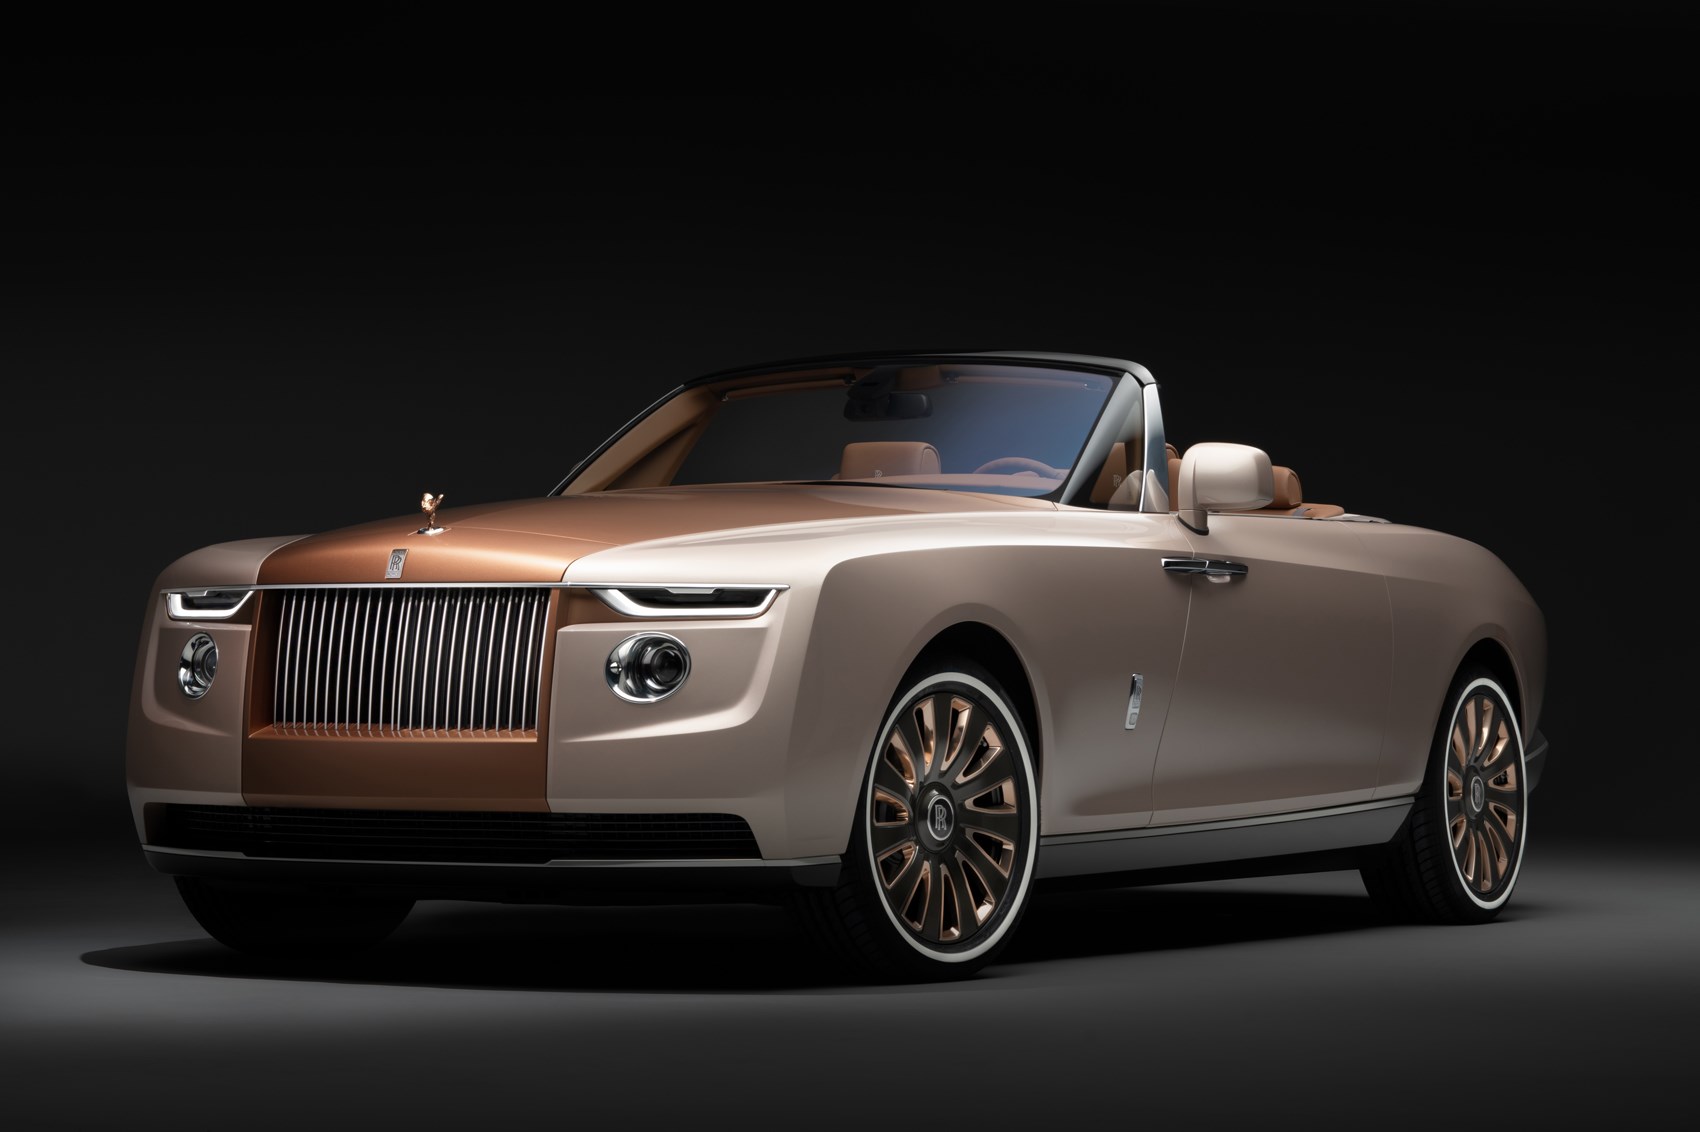 RollsRoyce Phantom Nautica Is Yet Another Special Edition OneOff Model   autoevolution